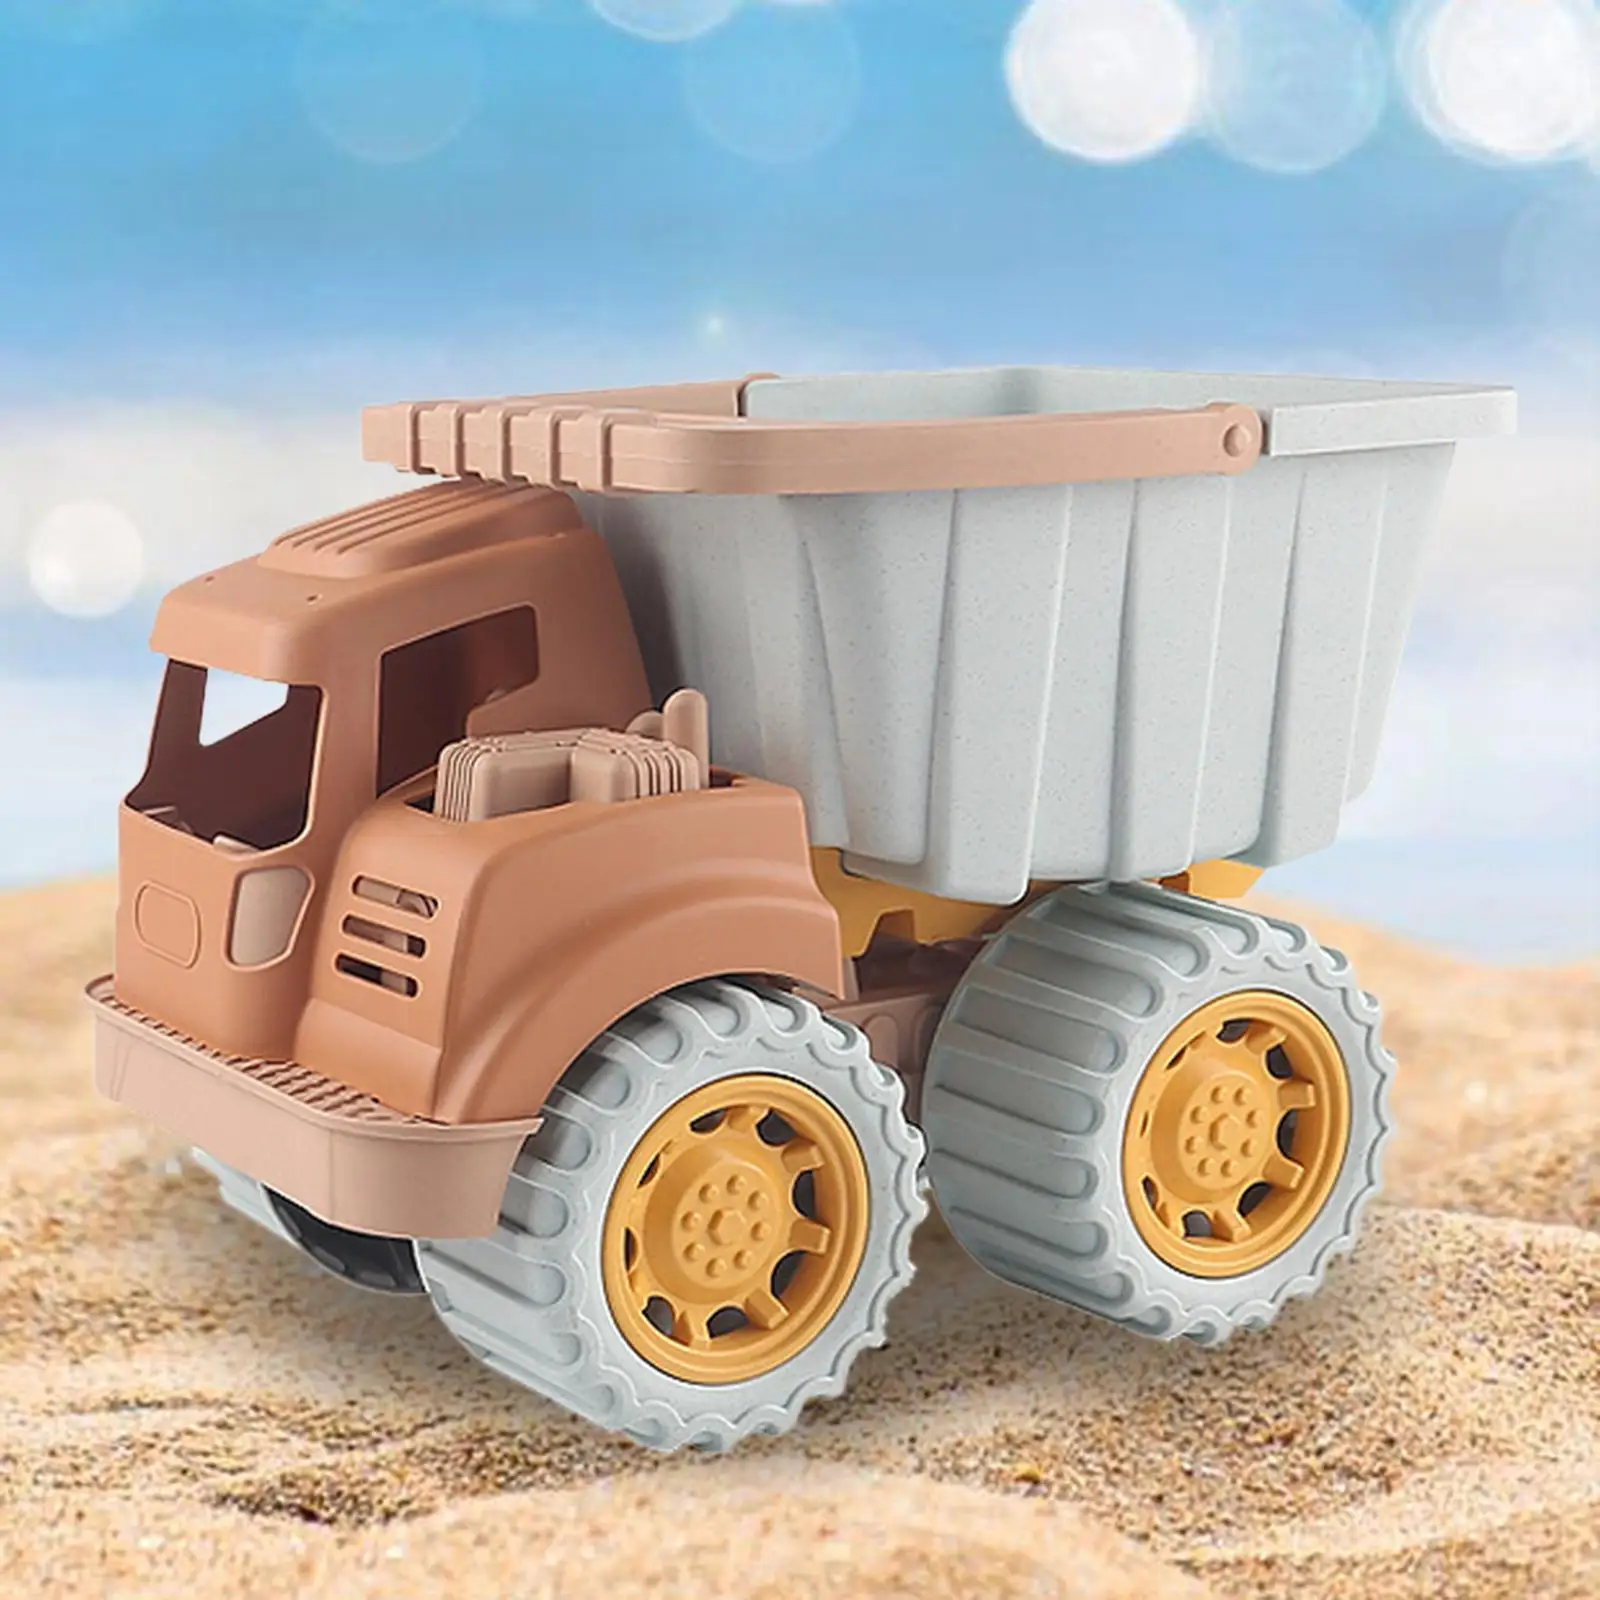 Dump Truck Toy Mini Construction Trucks Sandbox Toys Vehicle for Sand Beach Toy Seaside Play Party Favors Indoors Outdoors Boys